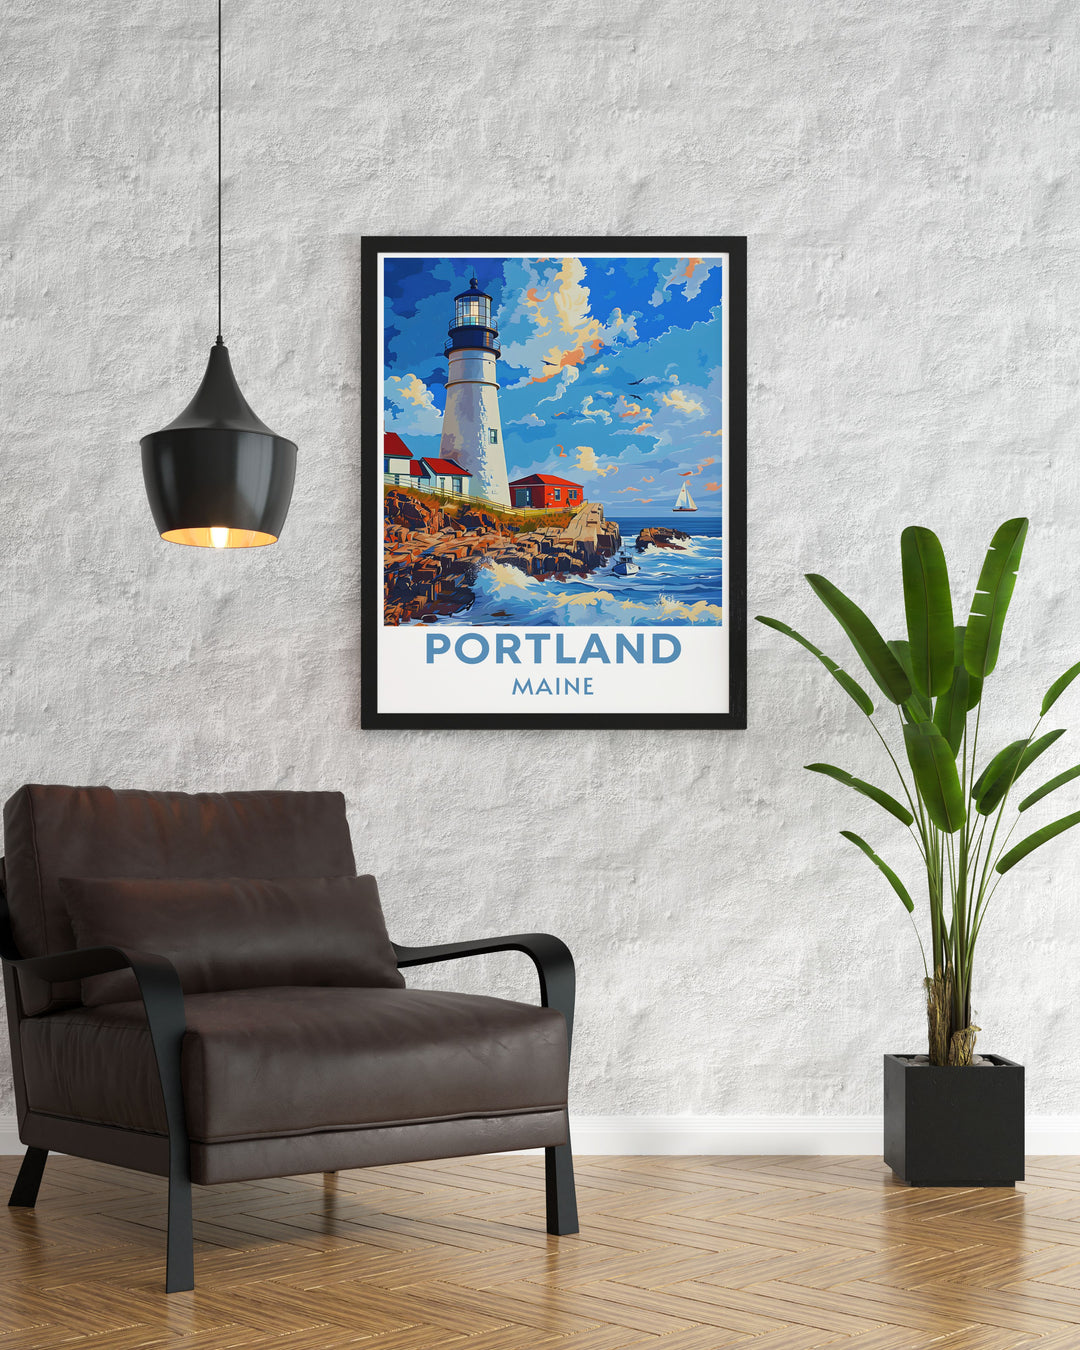 Capture the charm of Portland, Maine, with its historic waterfront and vibrant arts scene, beautifully showcased in this travel poster. Ideal for those who appreciate cultural richness.